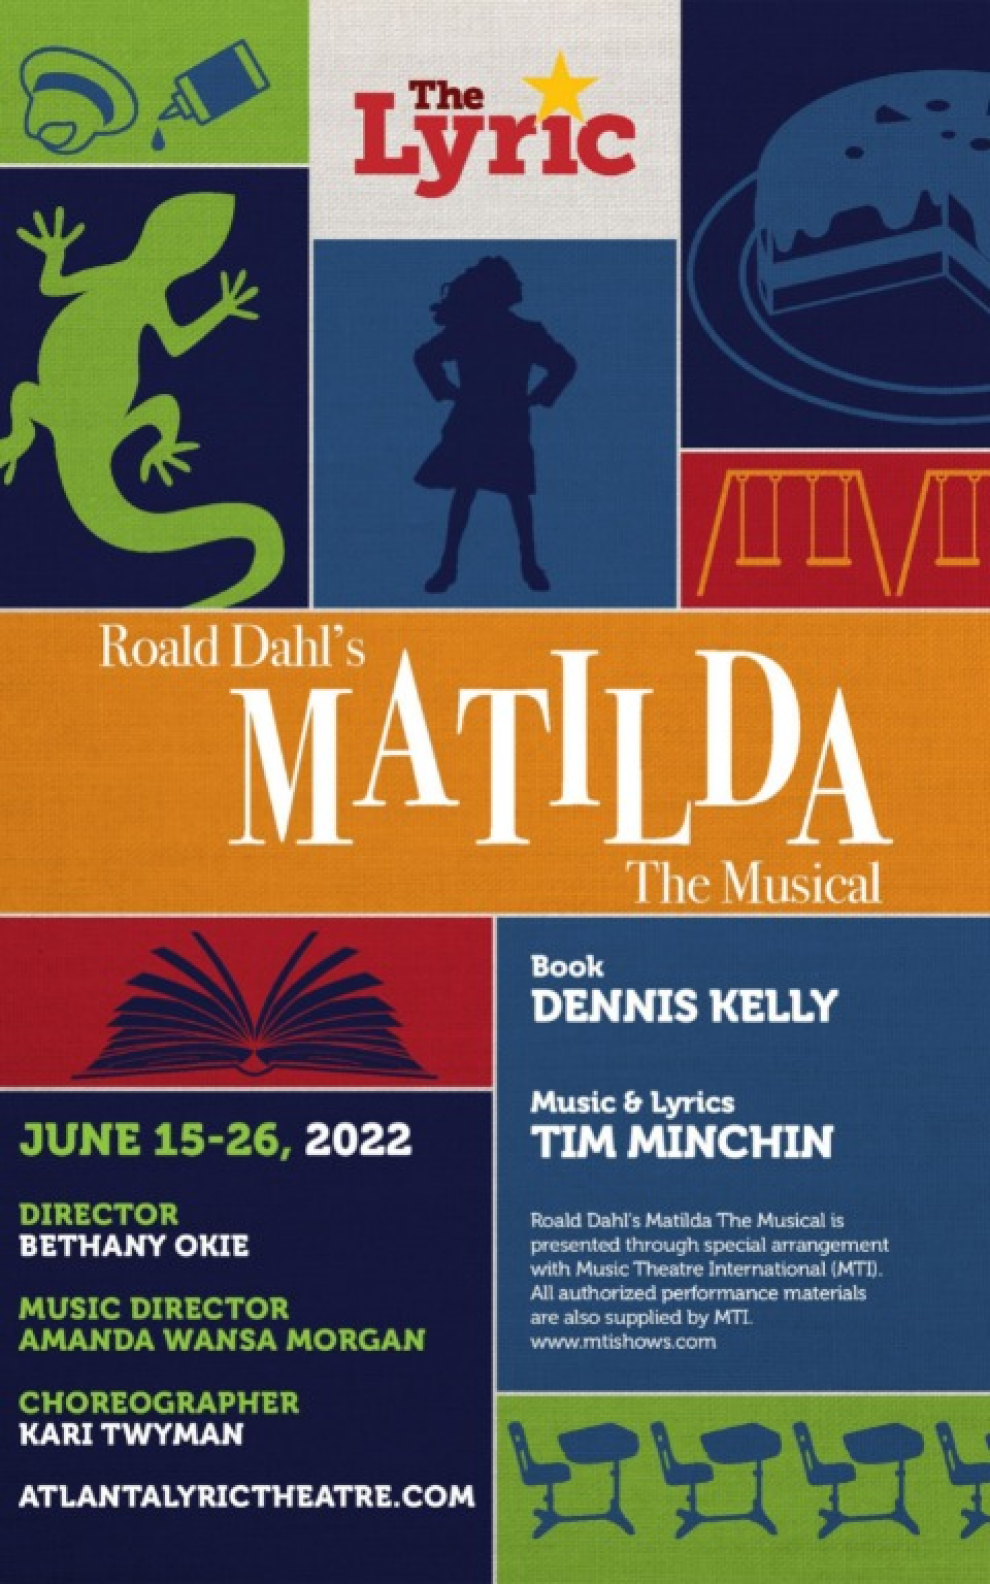 Playbill Cover